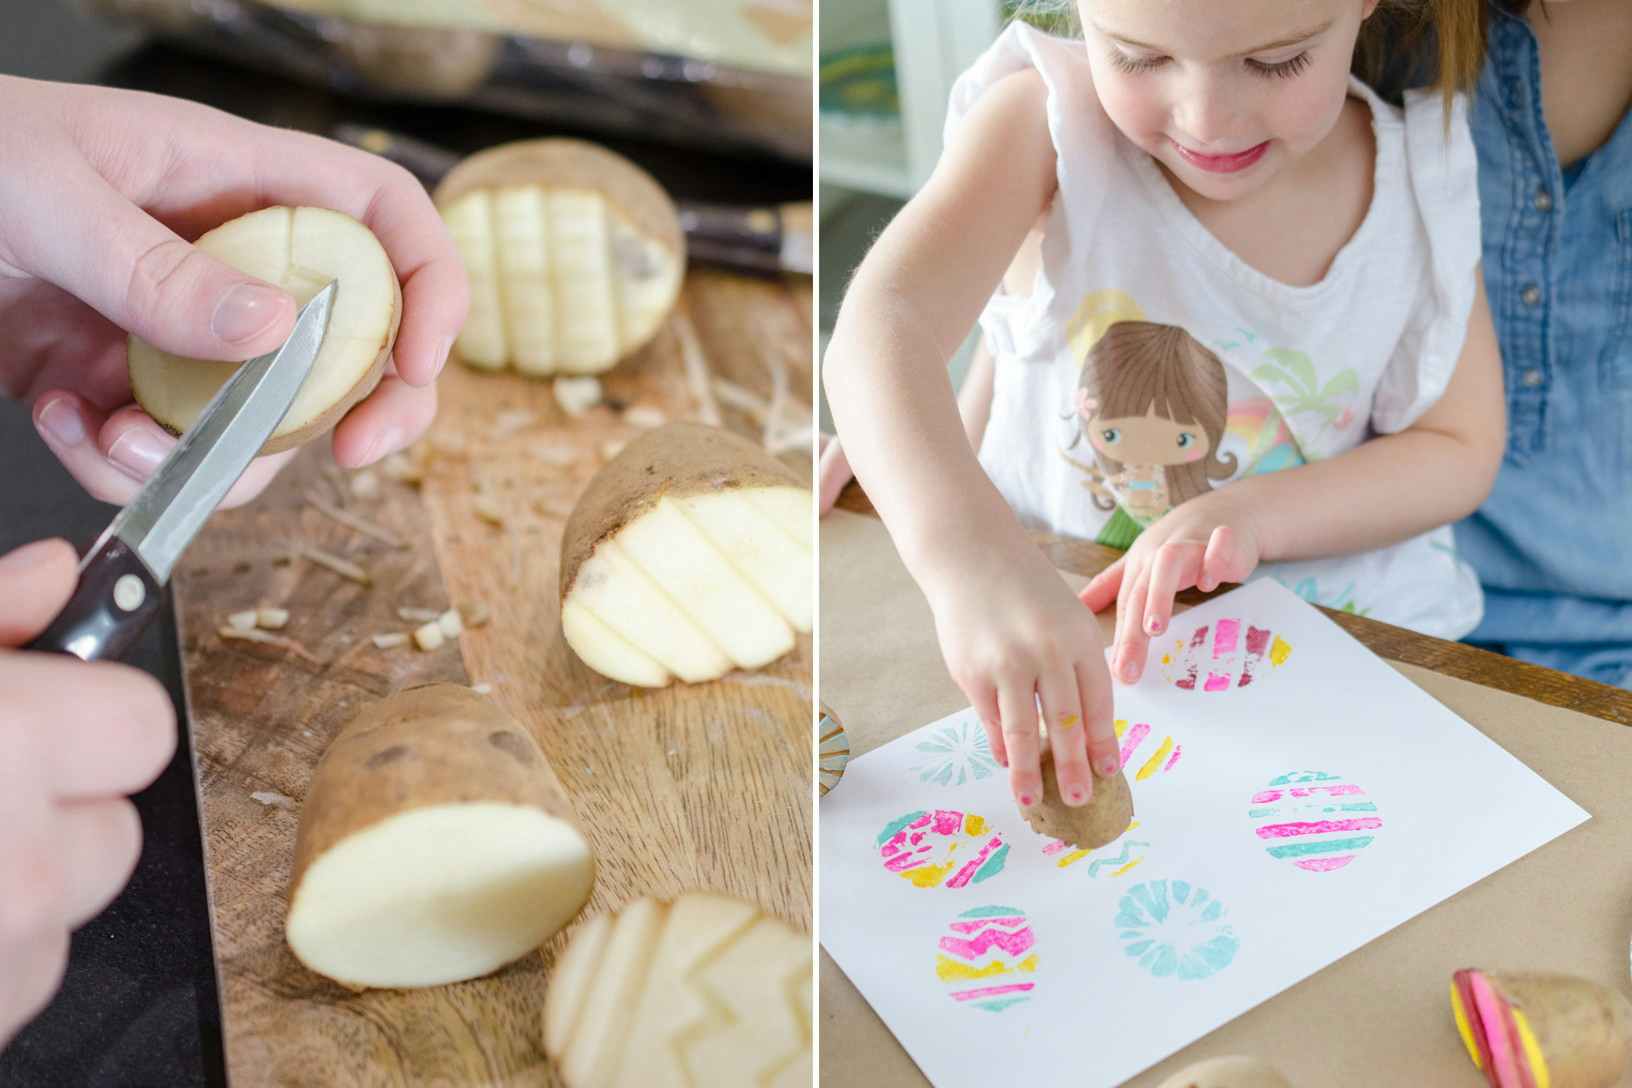 Turn a potato into an Easter egg stamp.